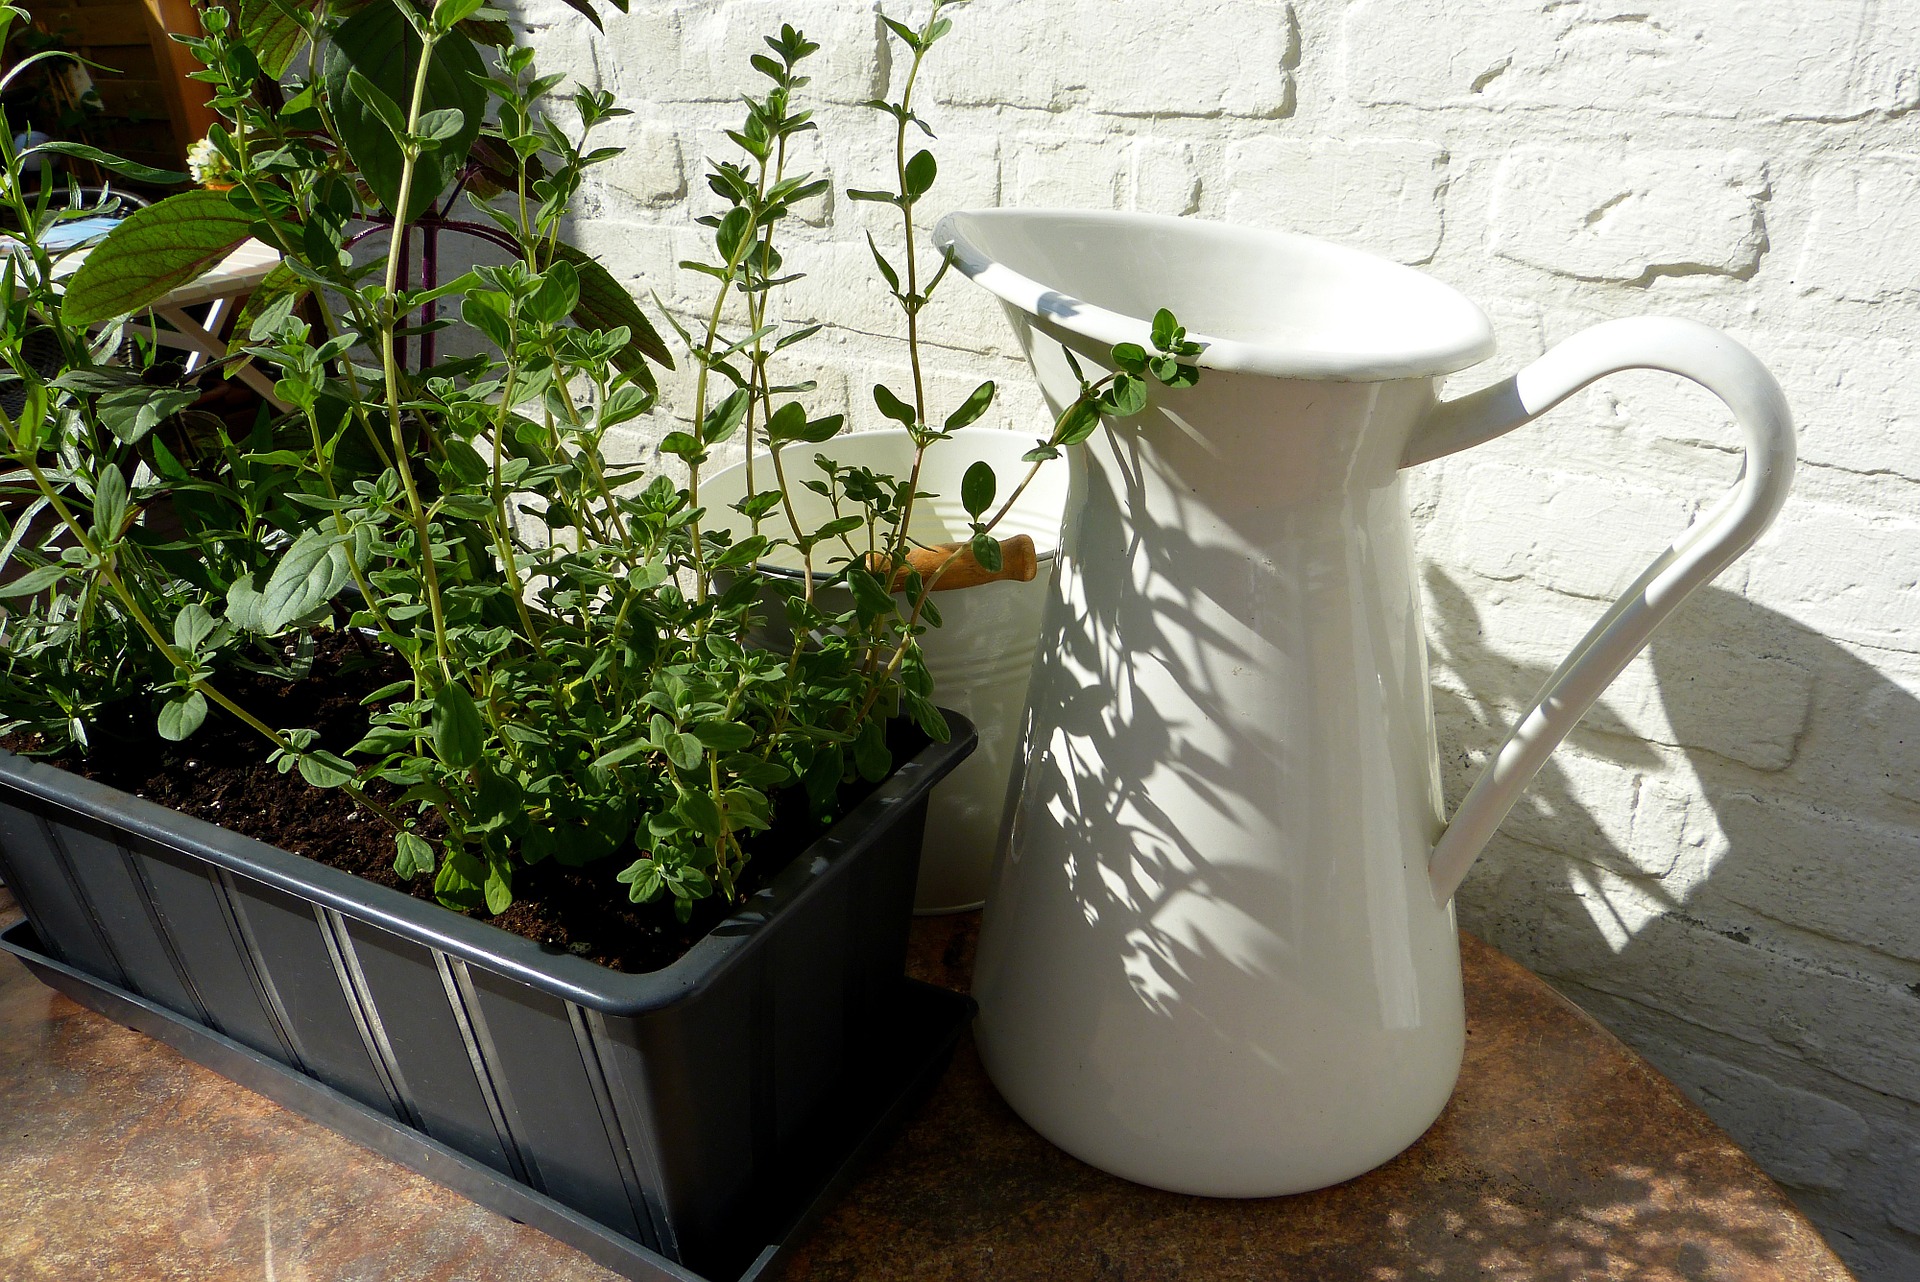 4 Themed Container Gardens to Up Your Gardening Game